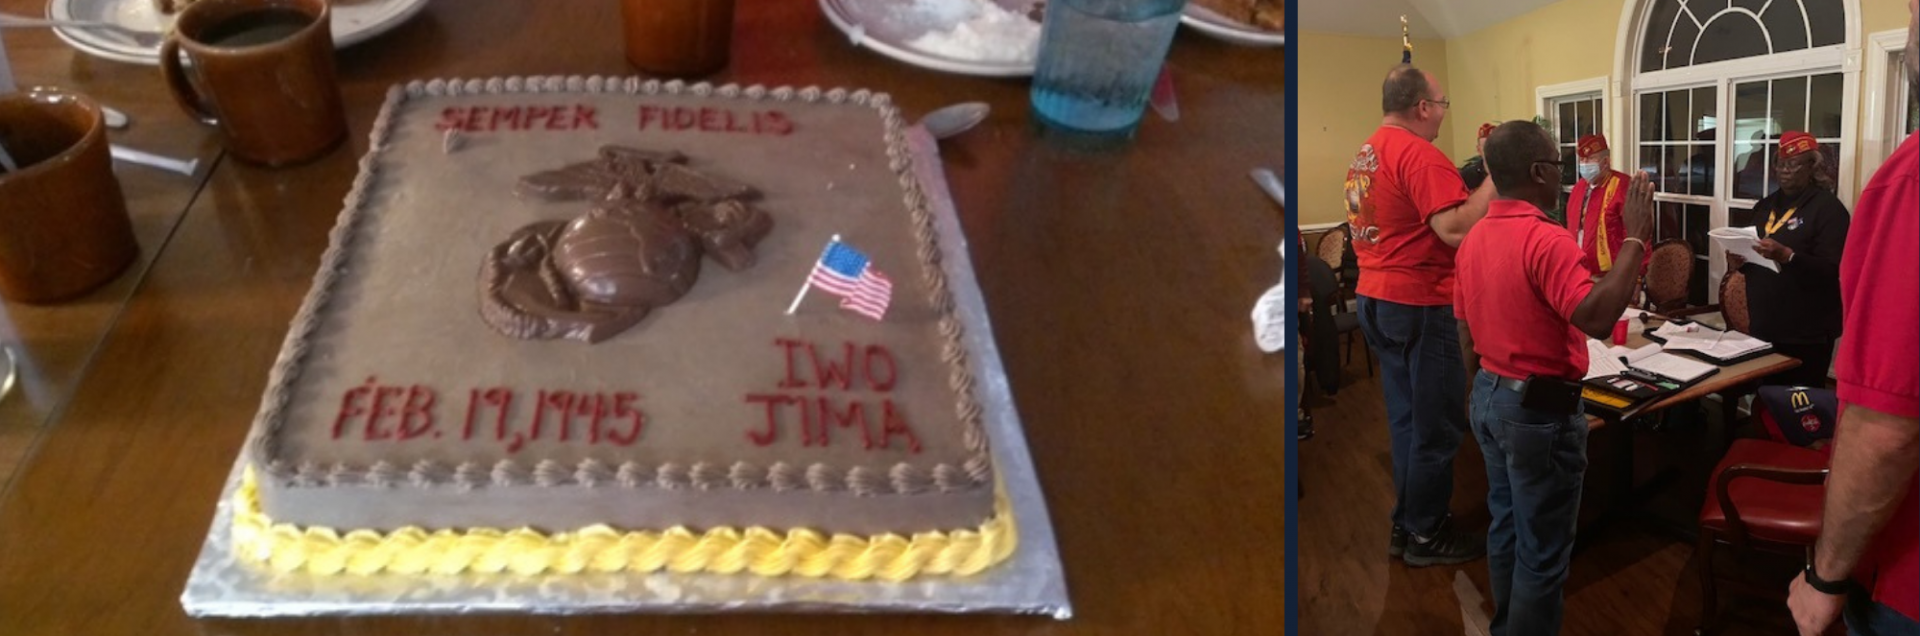 Marine Corps Speedy Wilson cake on the left, with 2 men joining organization on the right